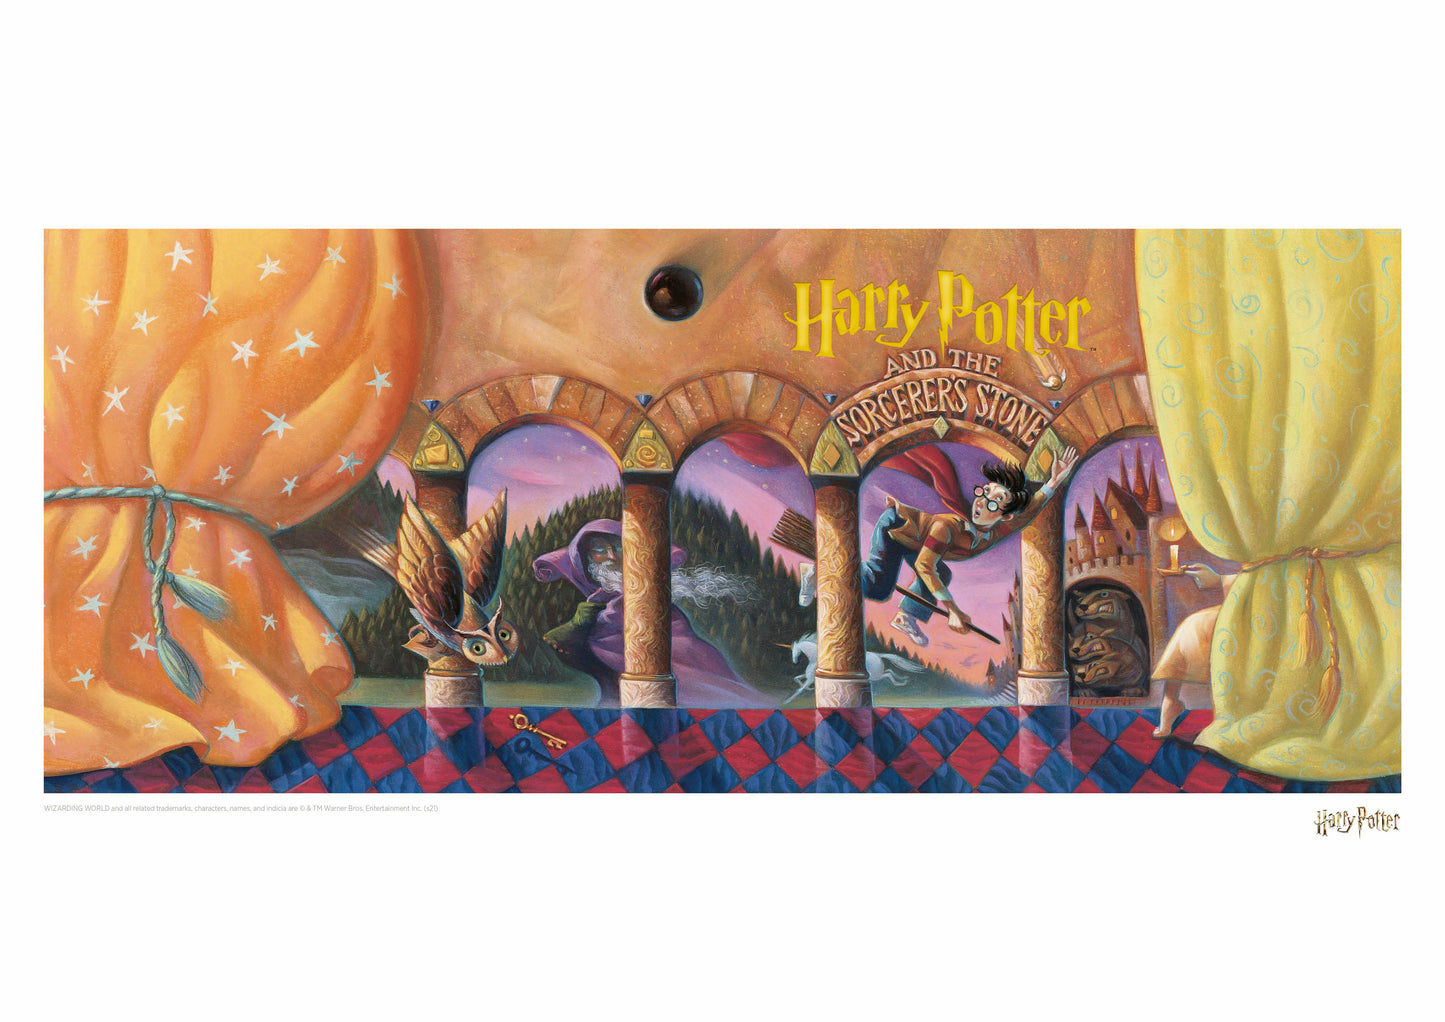 Harry Potter Book Cover - The Philosopher's Stone Artwork